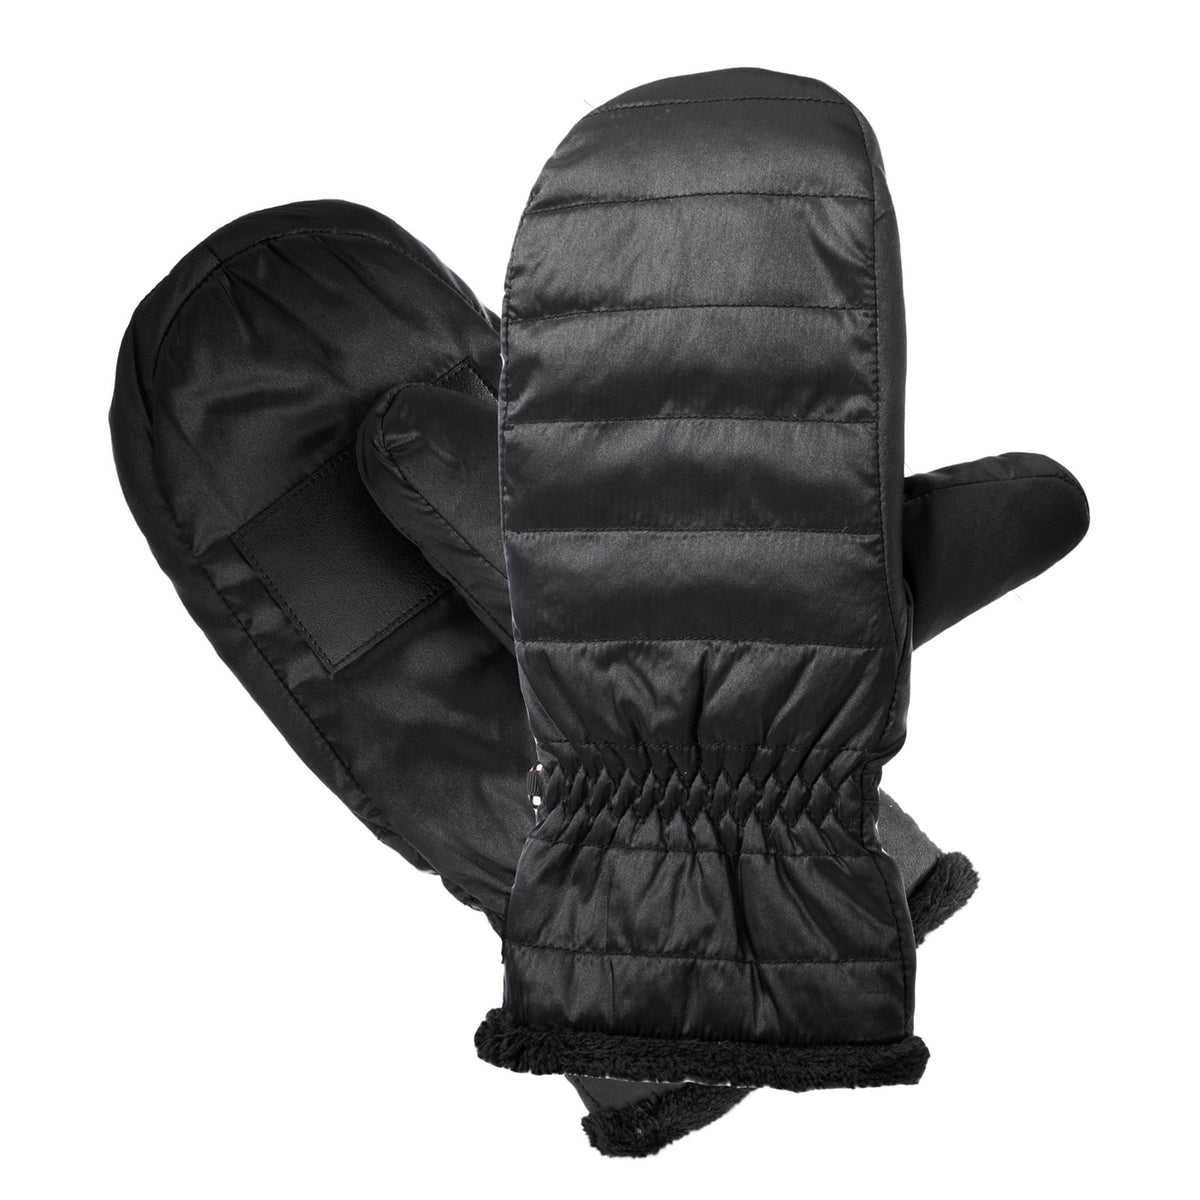 Isotoner Women's SLLEKHEAT™ Waterproof Quilted Mittens with smartDRI™ and smarTouch®